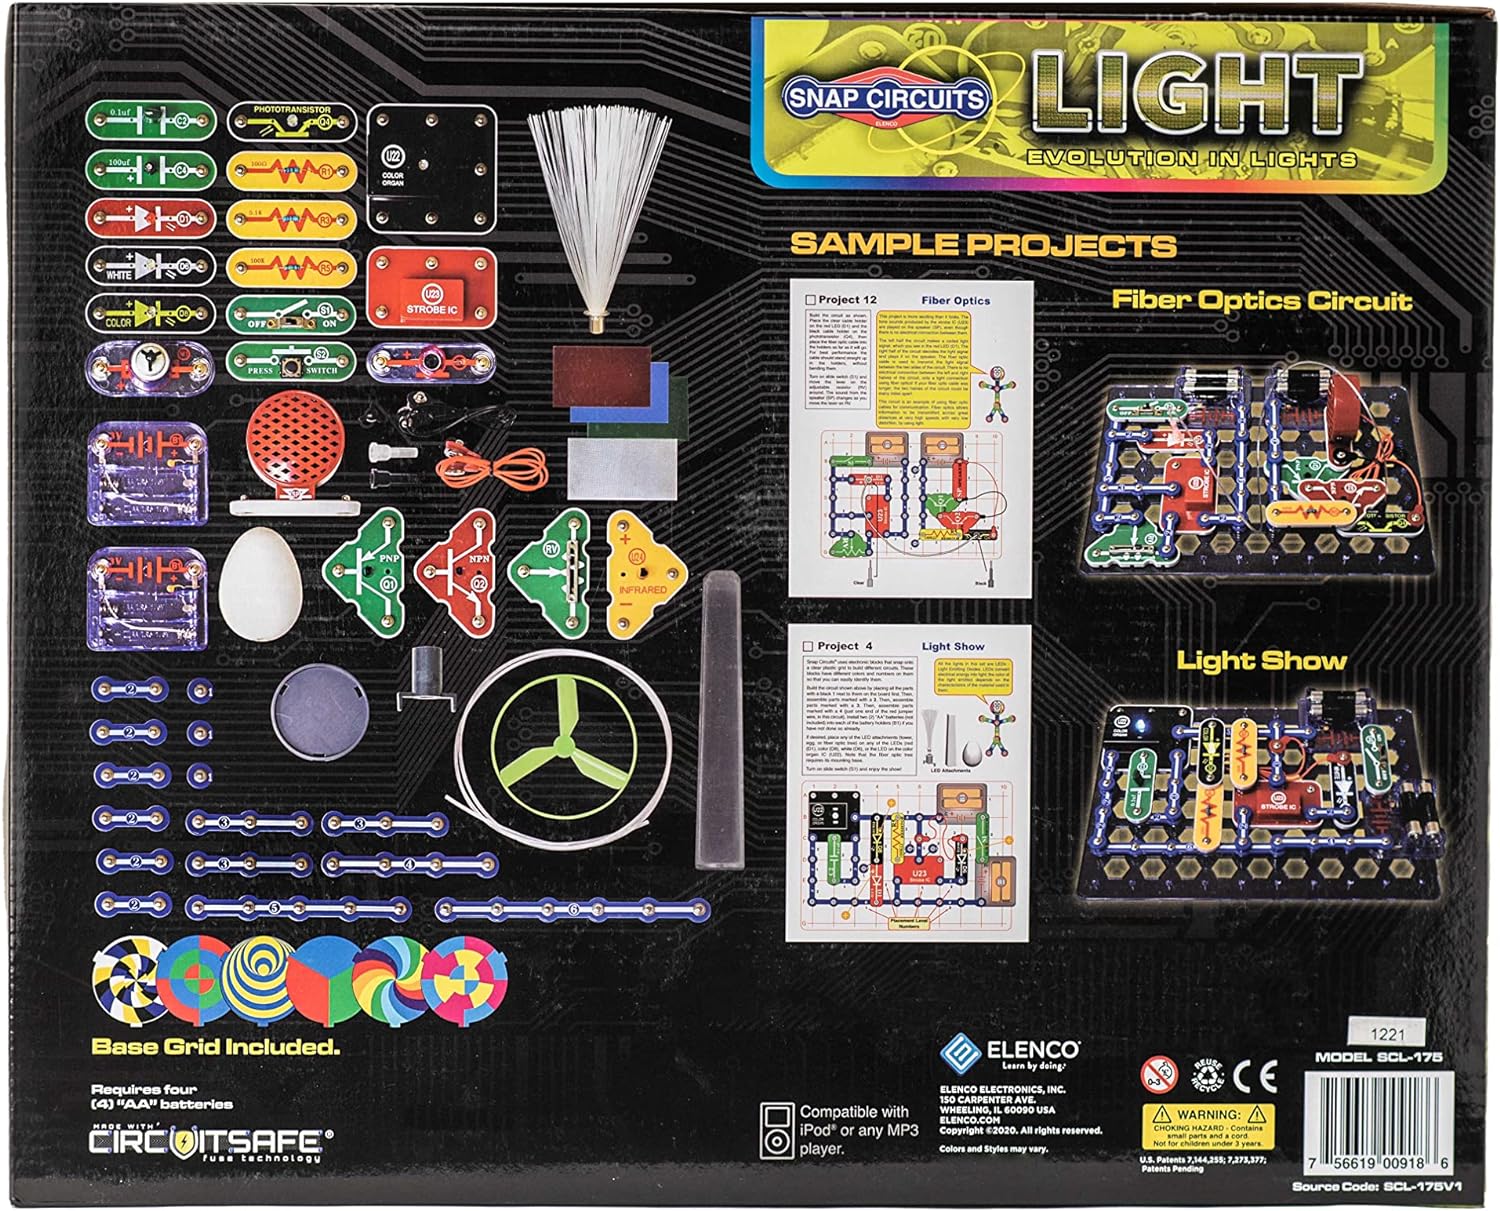 Snap Circuits LIGHT Electronics Exploration Kit | Over 175 Exciting STEM  Projects | Full Color Project Manual | 55+ Snap Circuits Parts | STEM